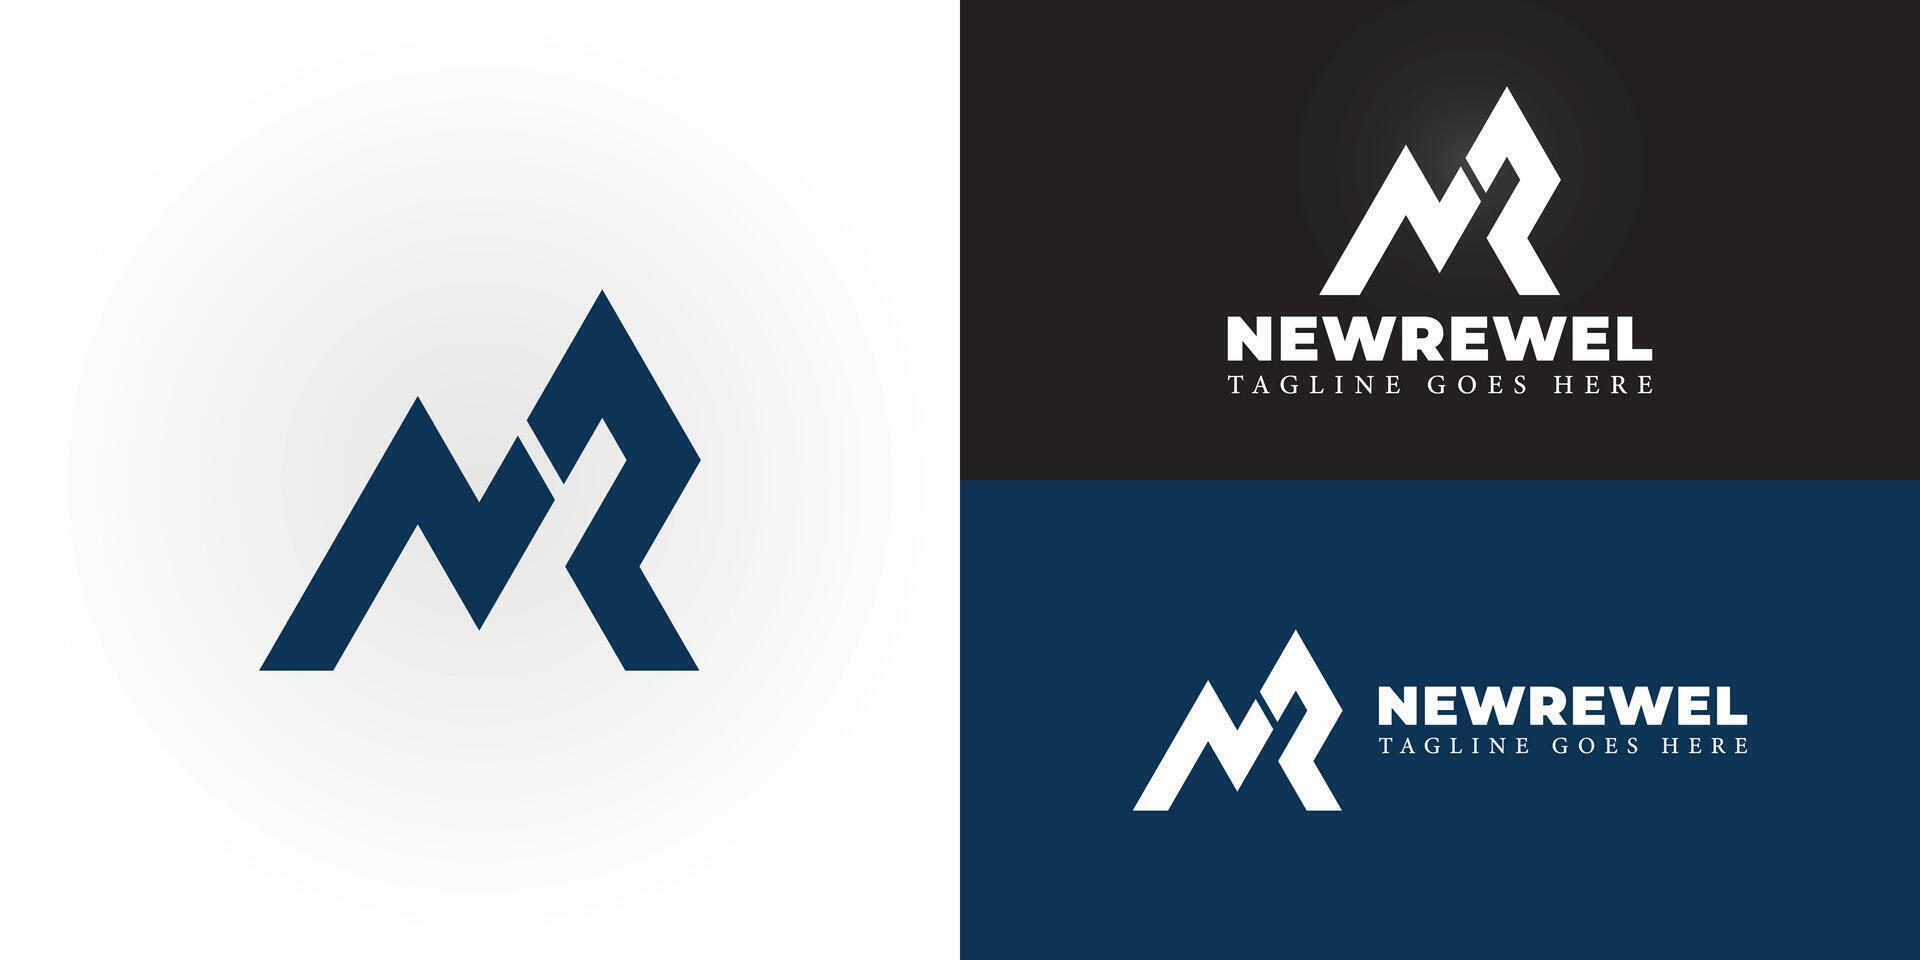 Abstract initial mountain letter NR or RN logo in deep blue color isolated on multiple background colors. The logo is suitable for business and consulting company logo design inspiration templates. vector